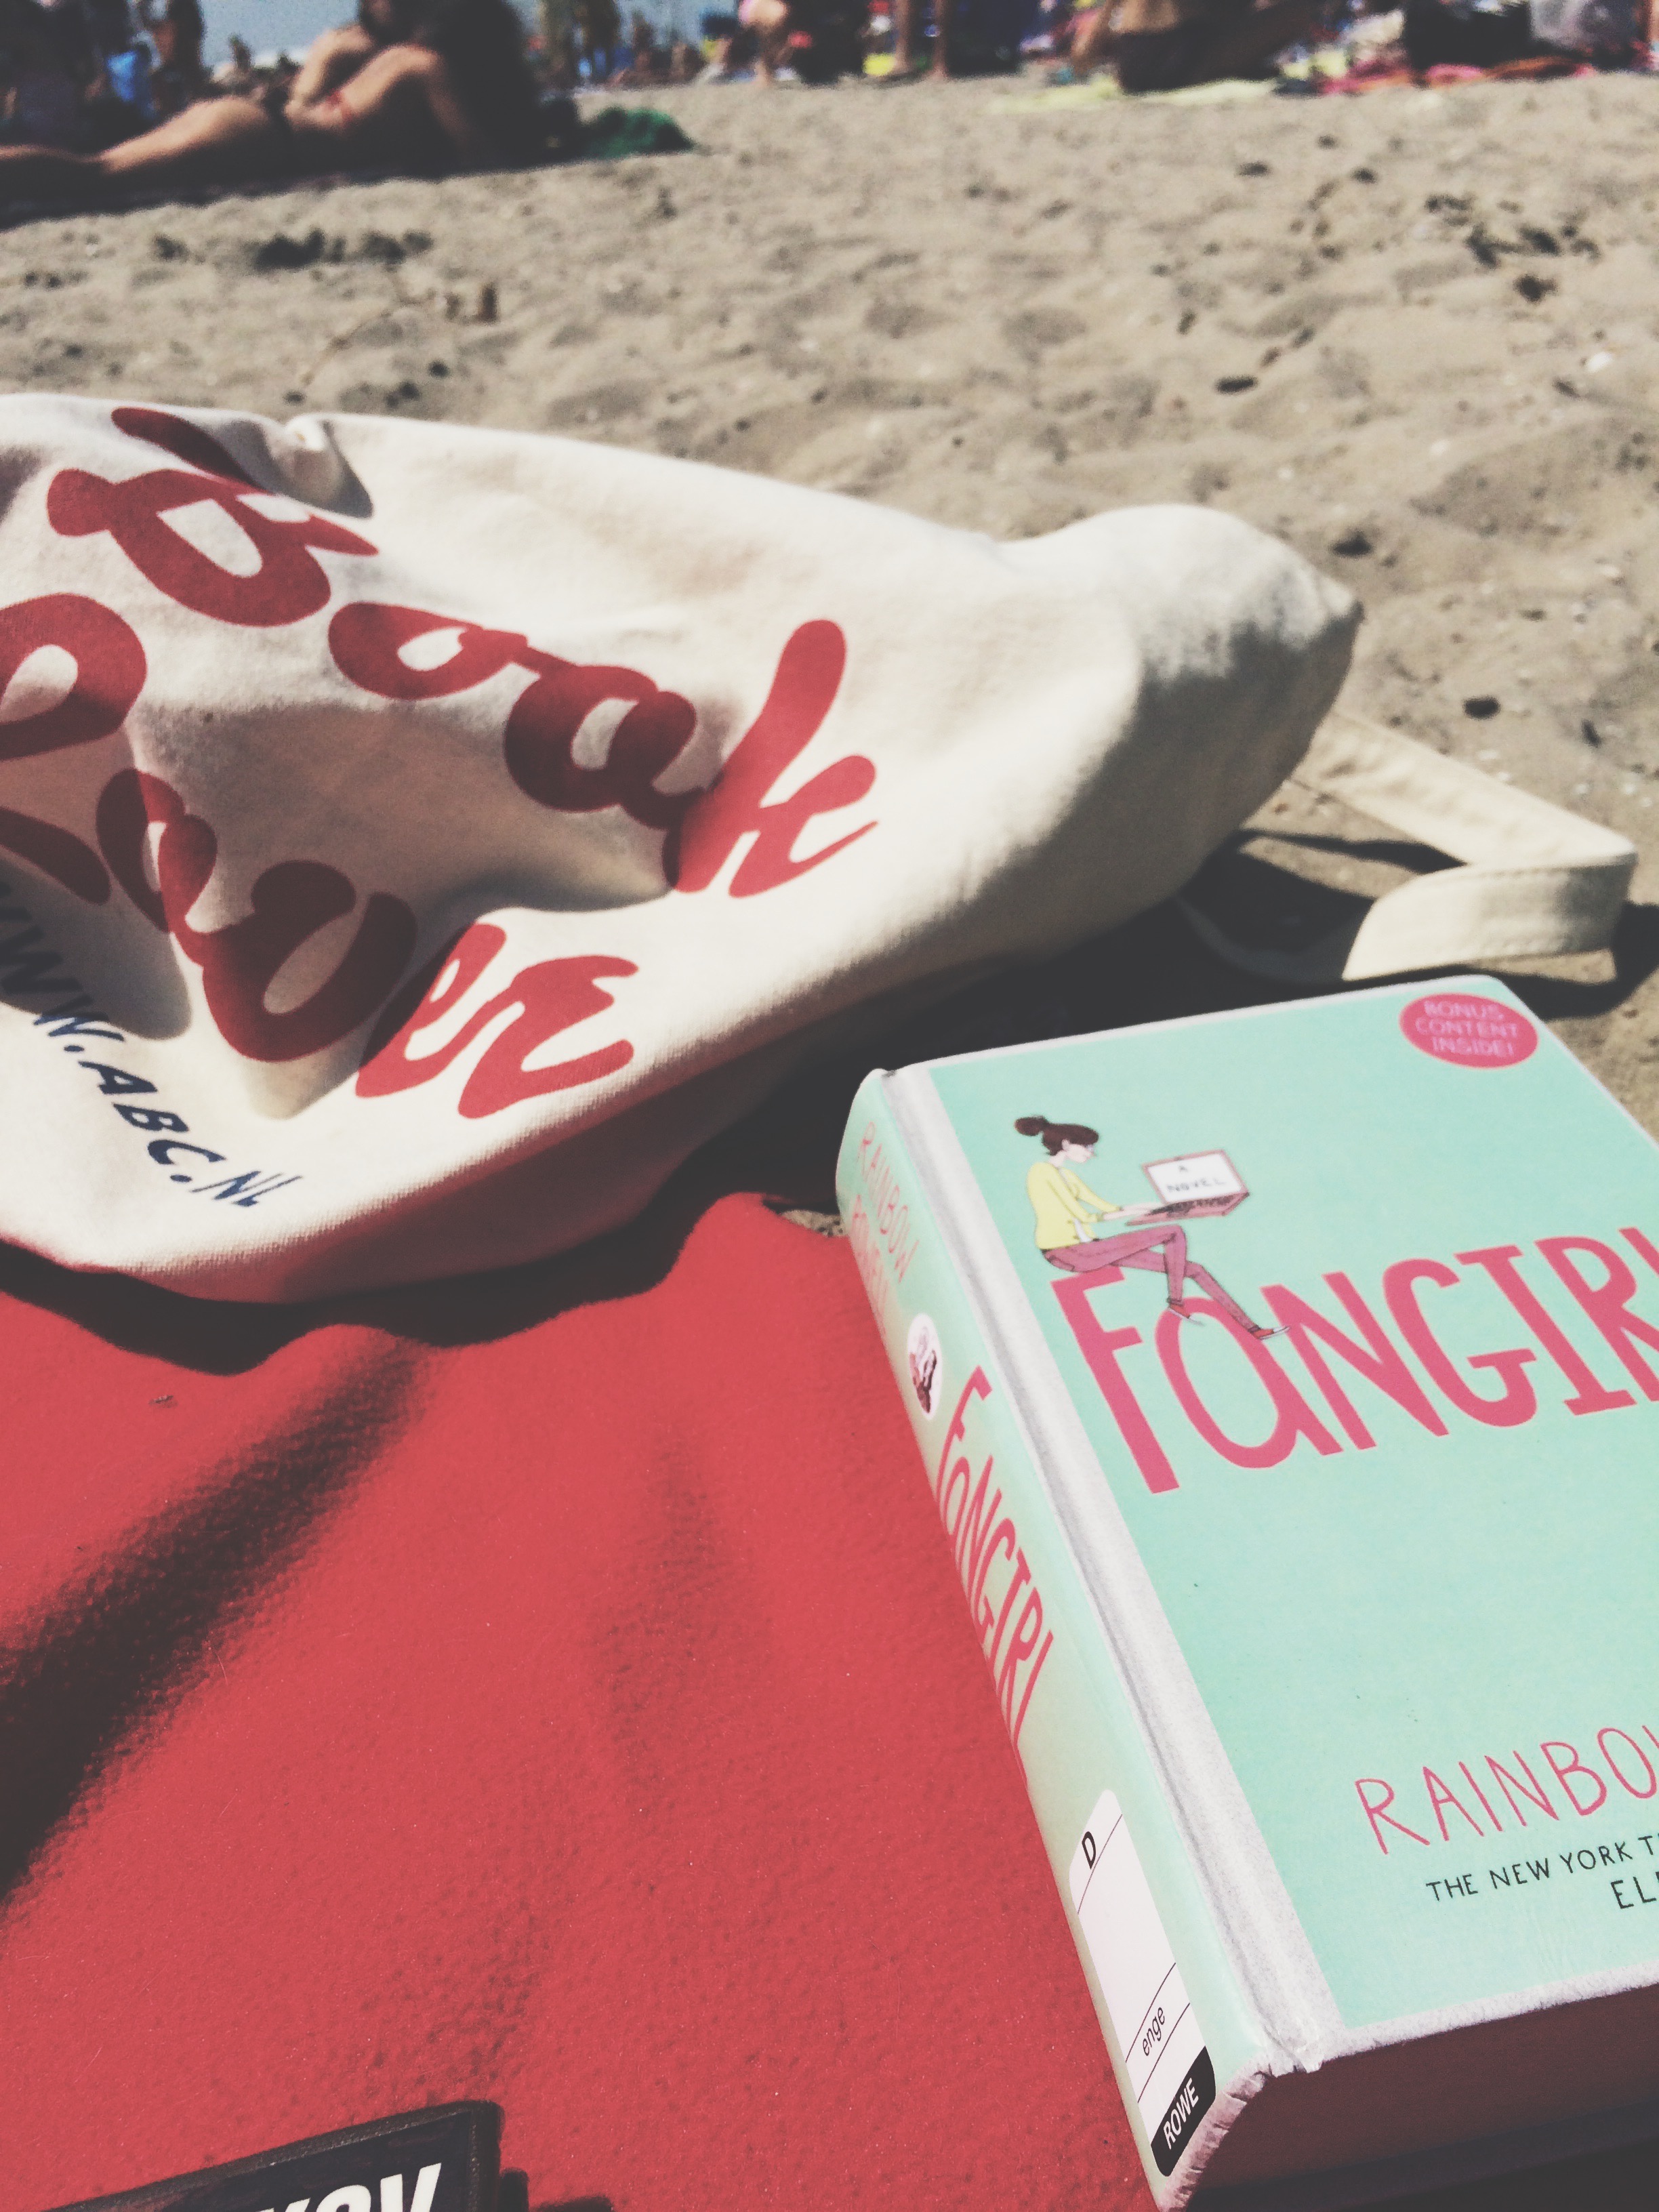 Fangirl is a novel by Rainbow Rowell that tells the story of Cath Avery as she navigates her first year of college